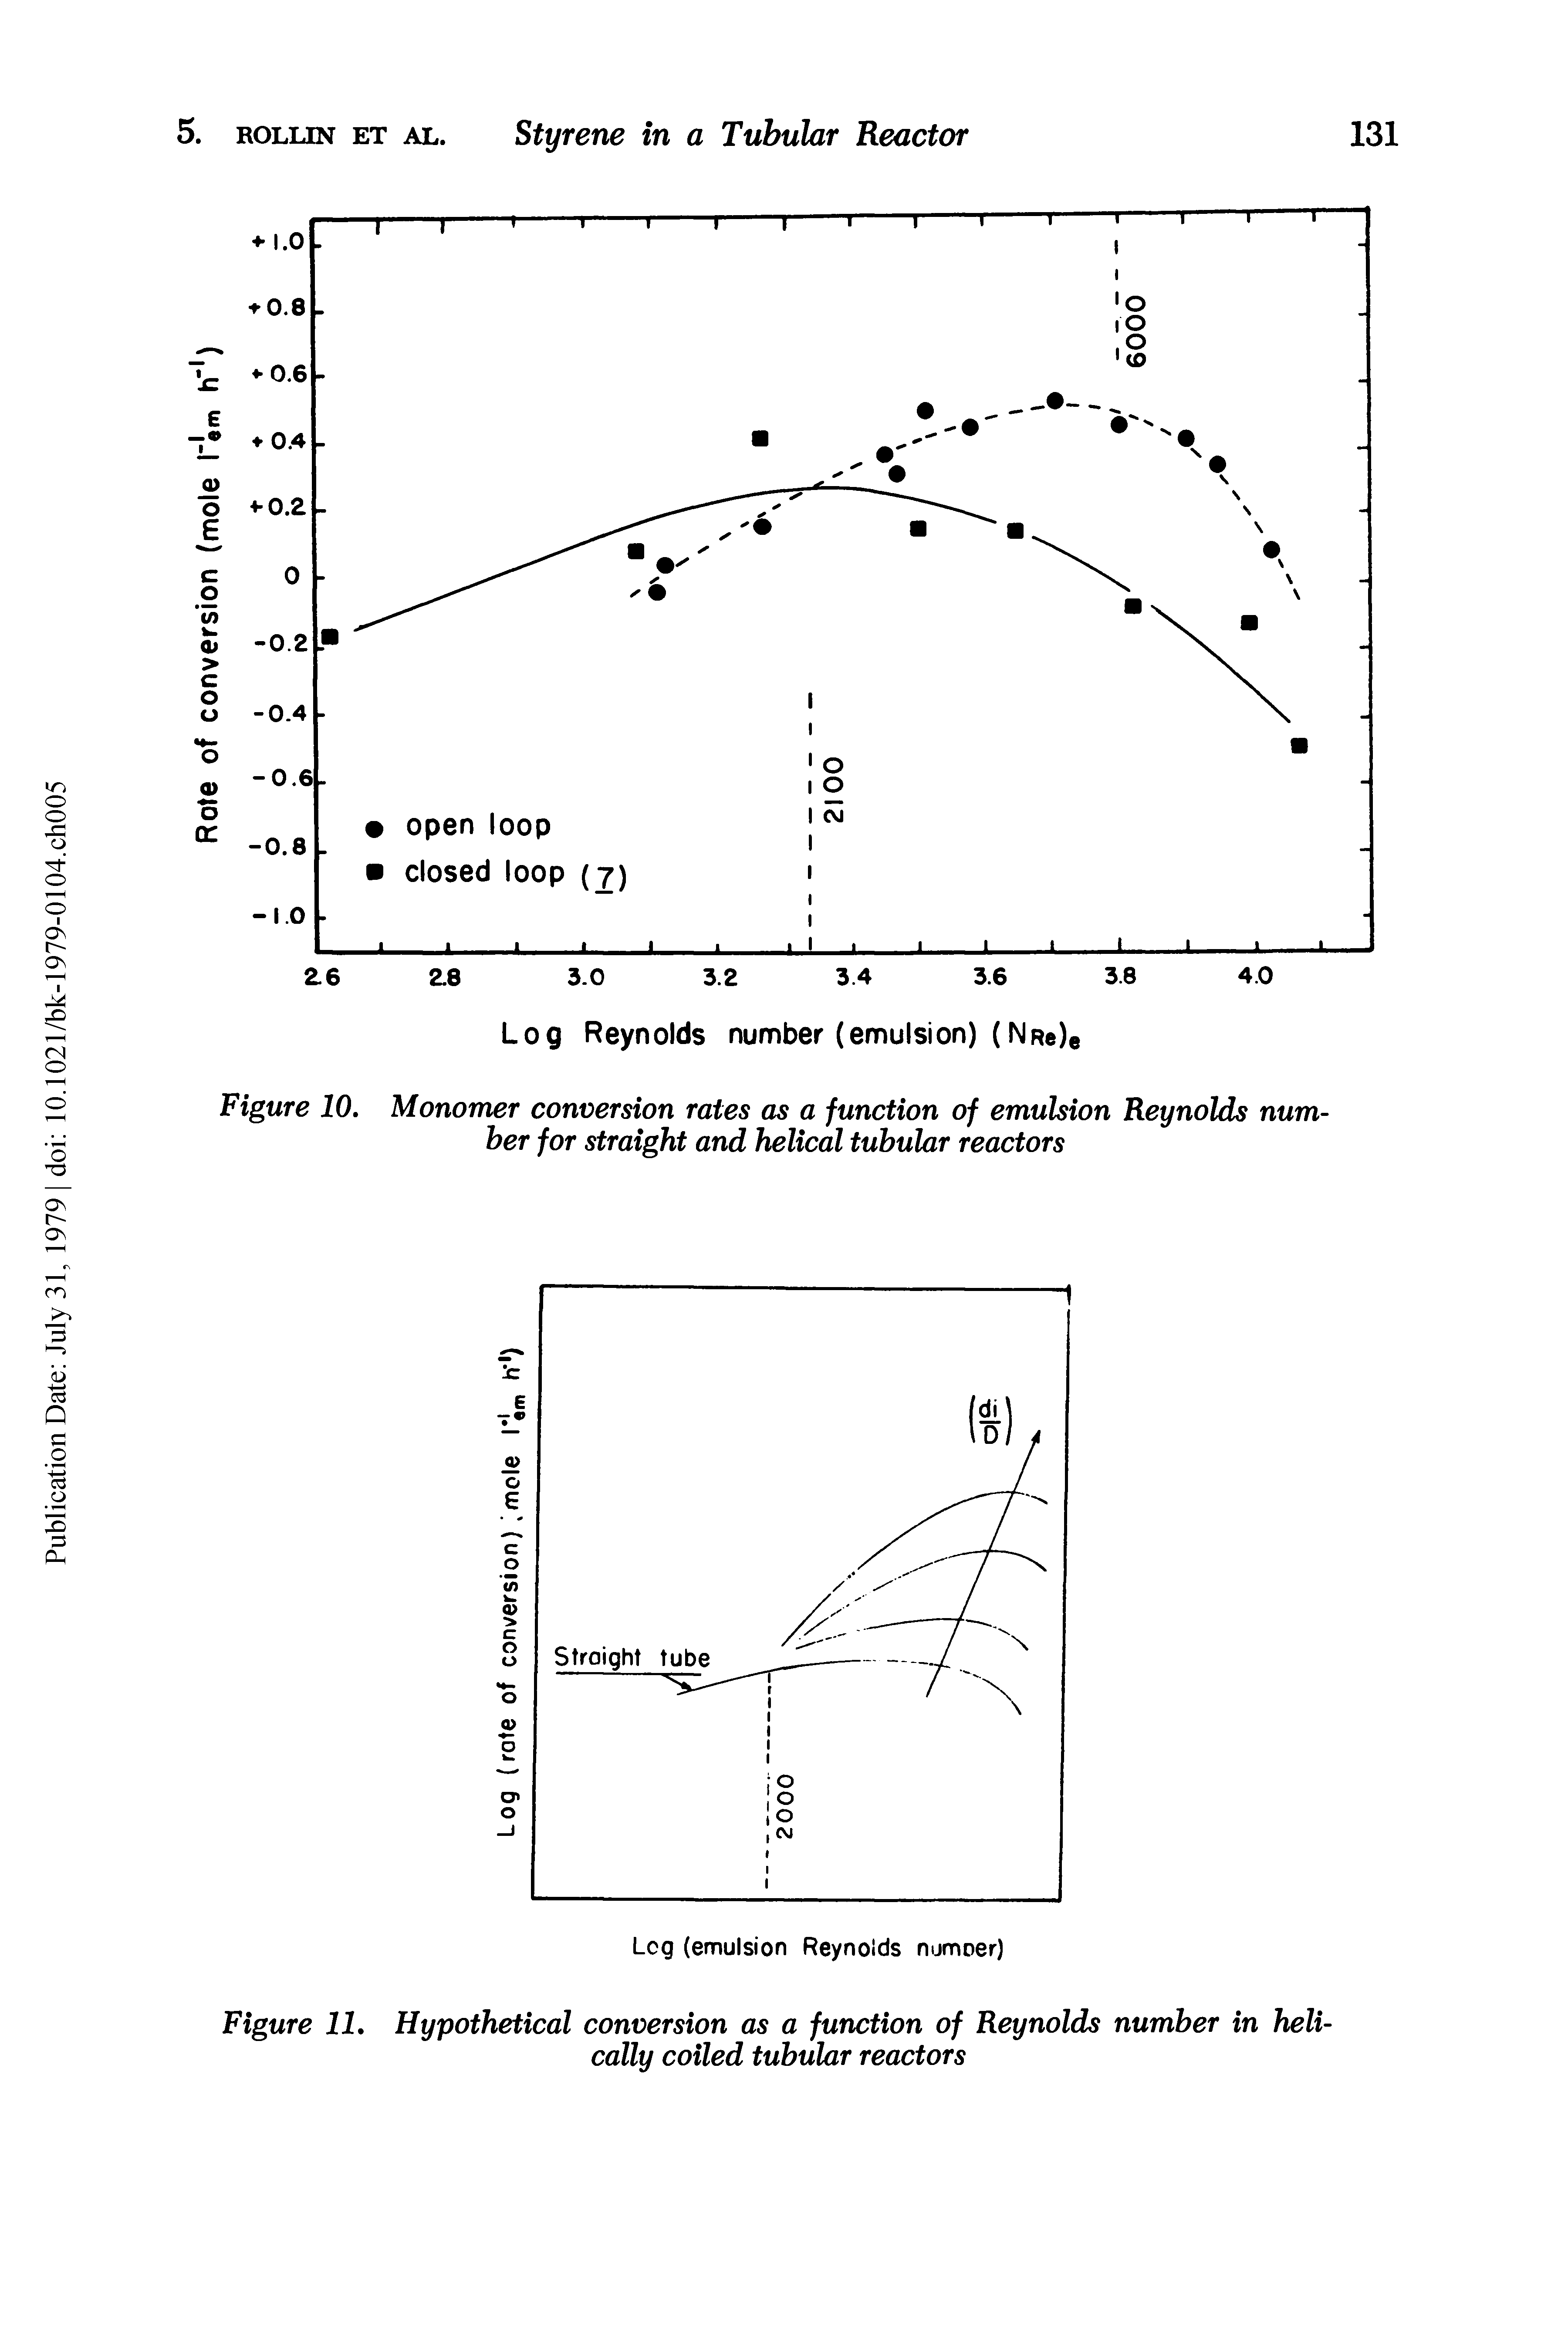 Figure 11. Hypothetical conversion as a function of Reynolds number in helically coiled tubular reactors...